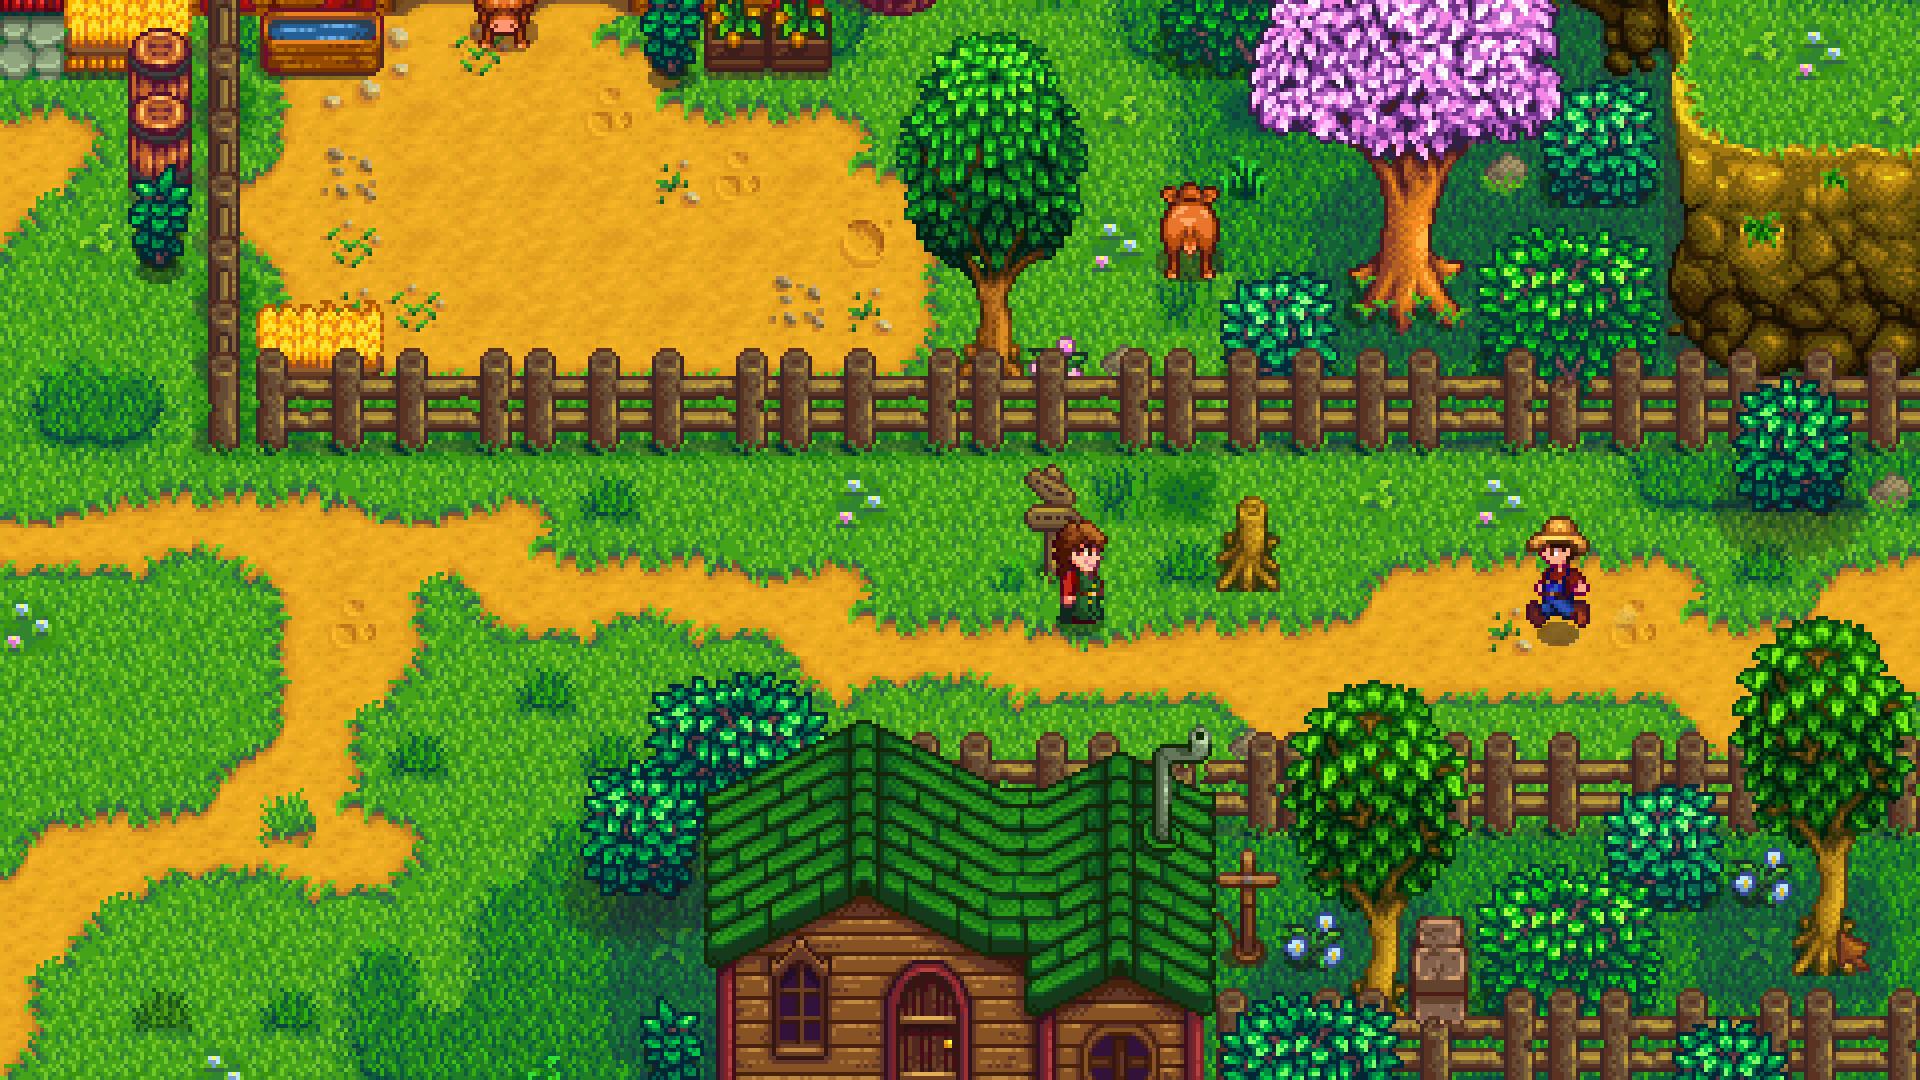 ‘Stardew Valley’ 1.6.4 Update With New Content, Improvements, Balance Changes, and More Is Now Available on PC